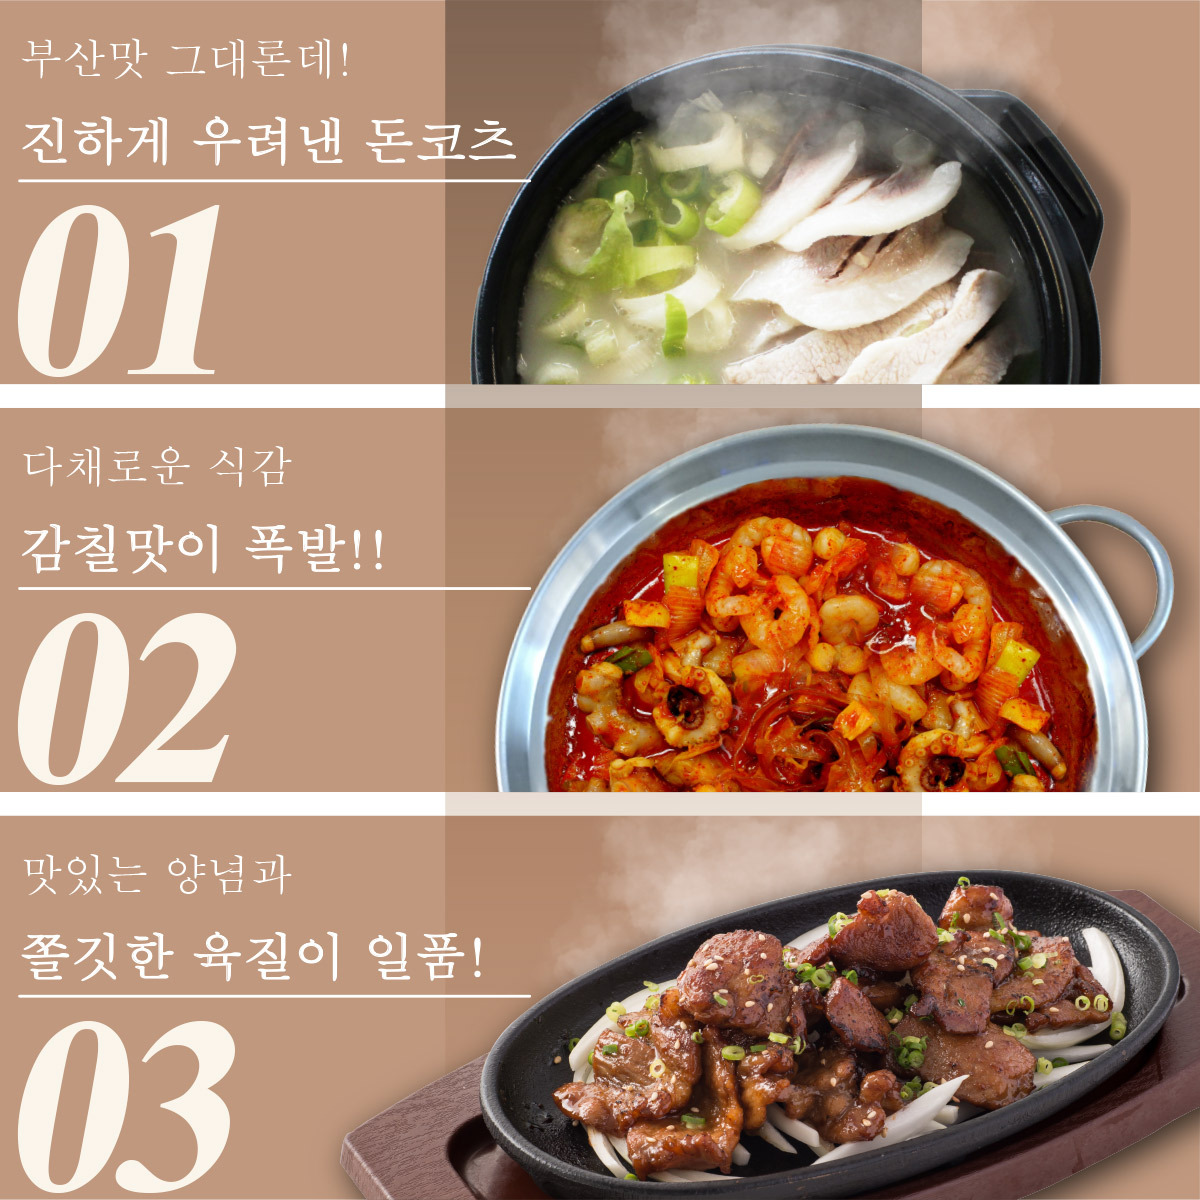  your order Korea gourmet set boiler mountain . meal . for set your order gourmet Korea food mail order recommendation nakopsete axis pa pig galbi profit Korea travel Korea boiler mountain special product 